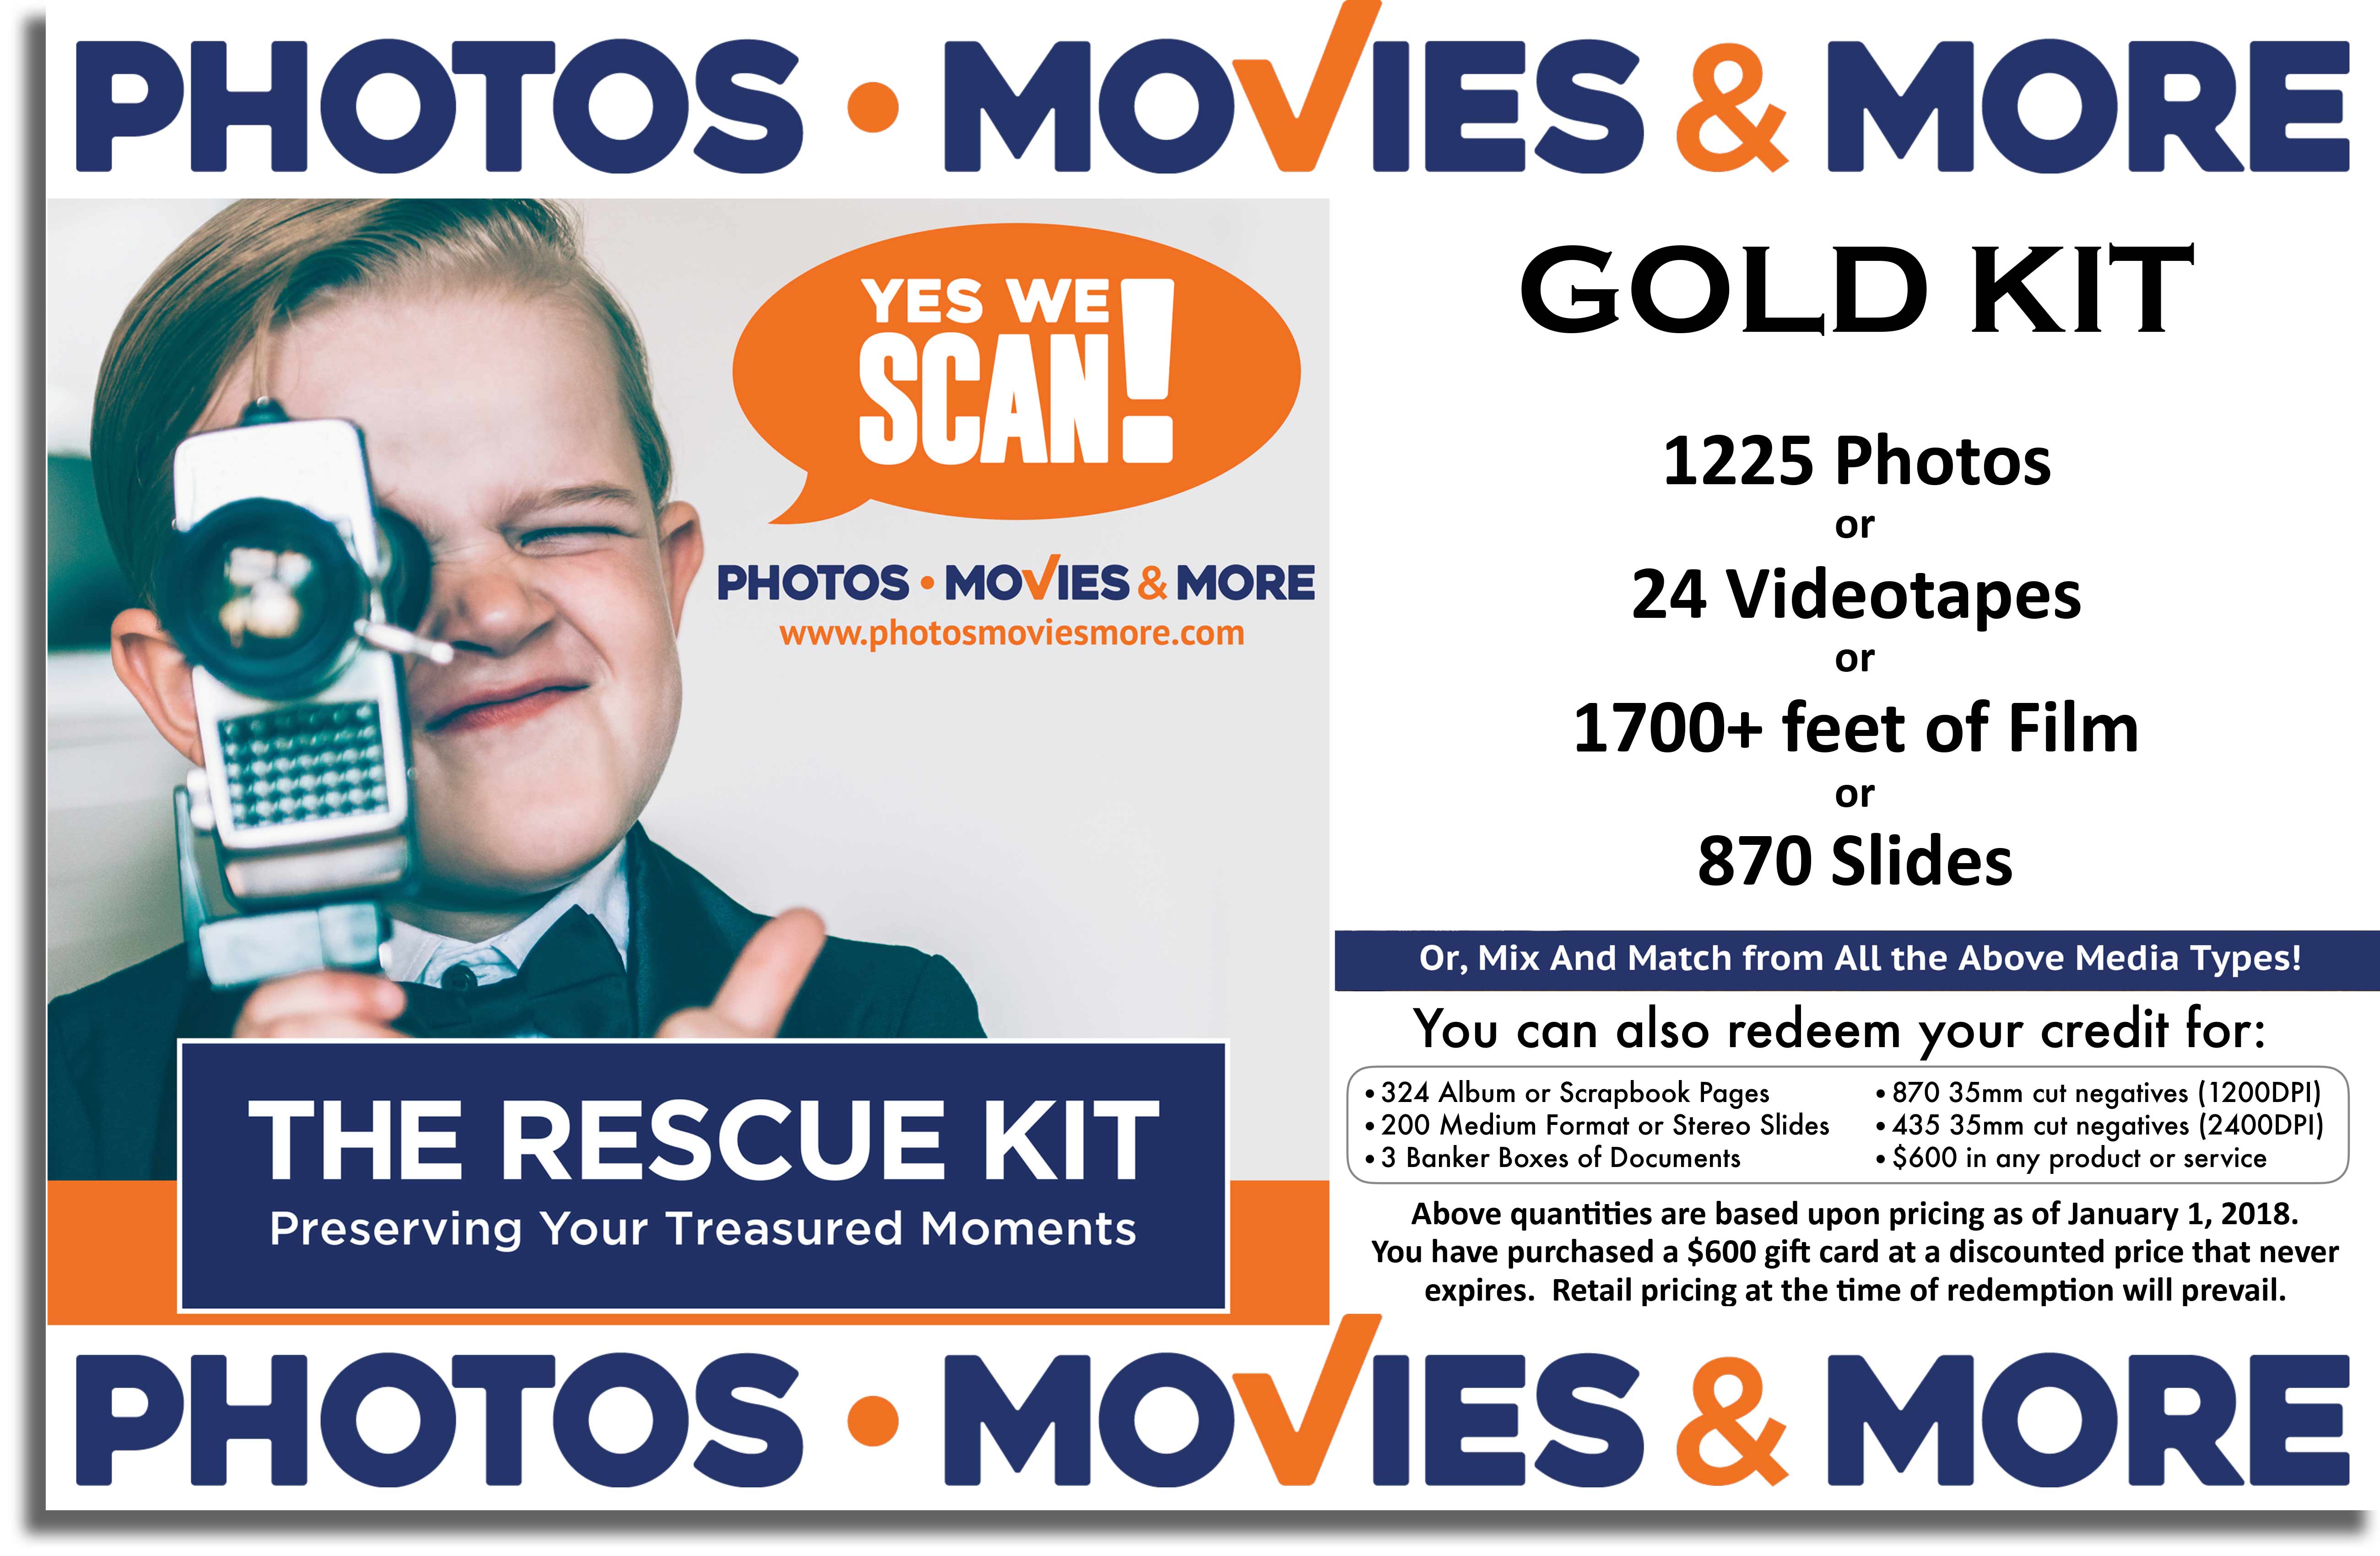 Gold Kit Photos Movies and More